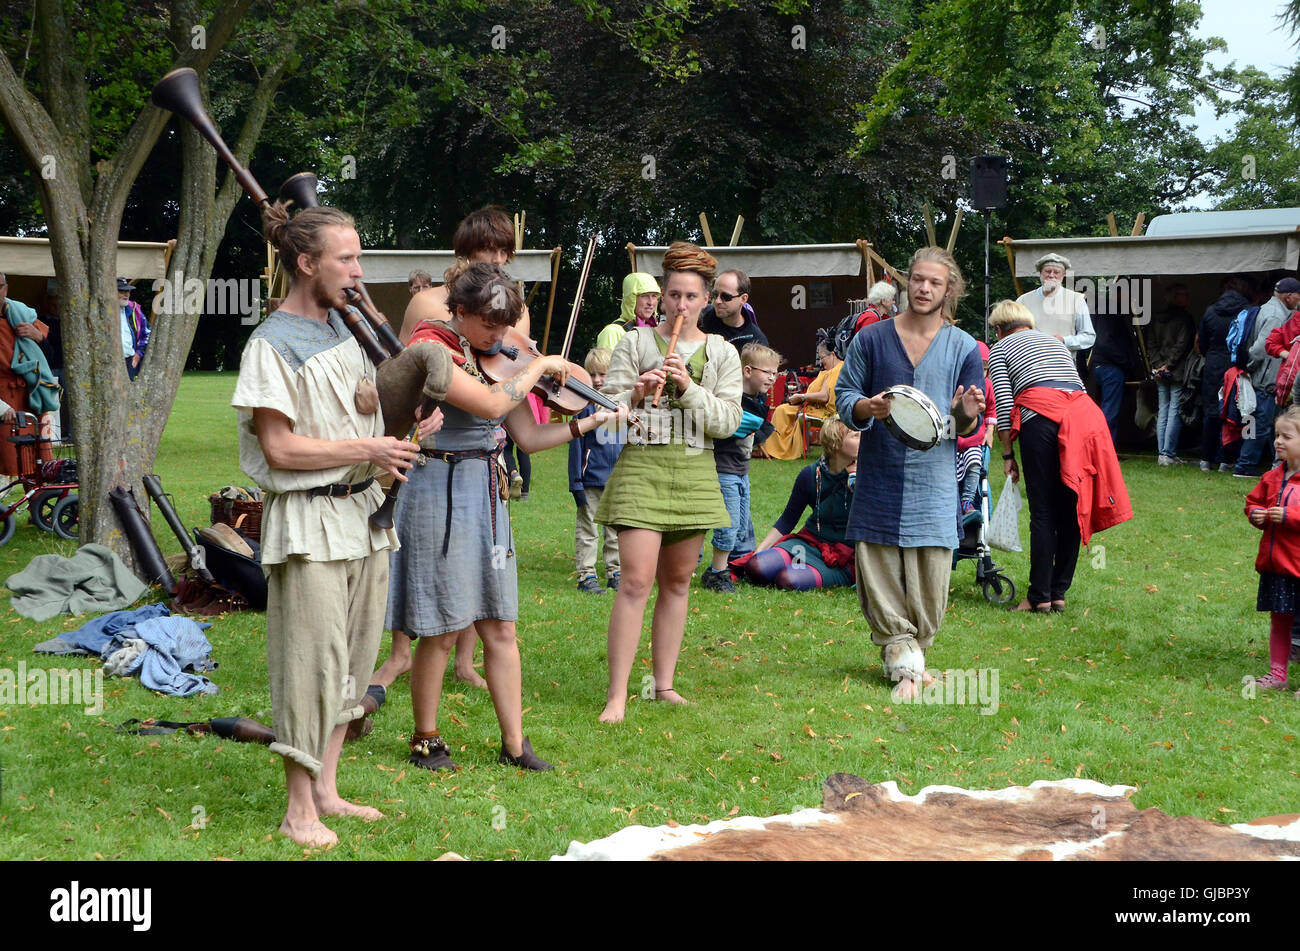 Band plays on ancient musical instruments at a mid age festival. Stock Photo